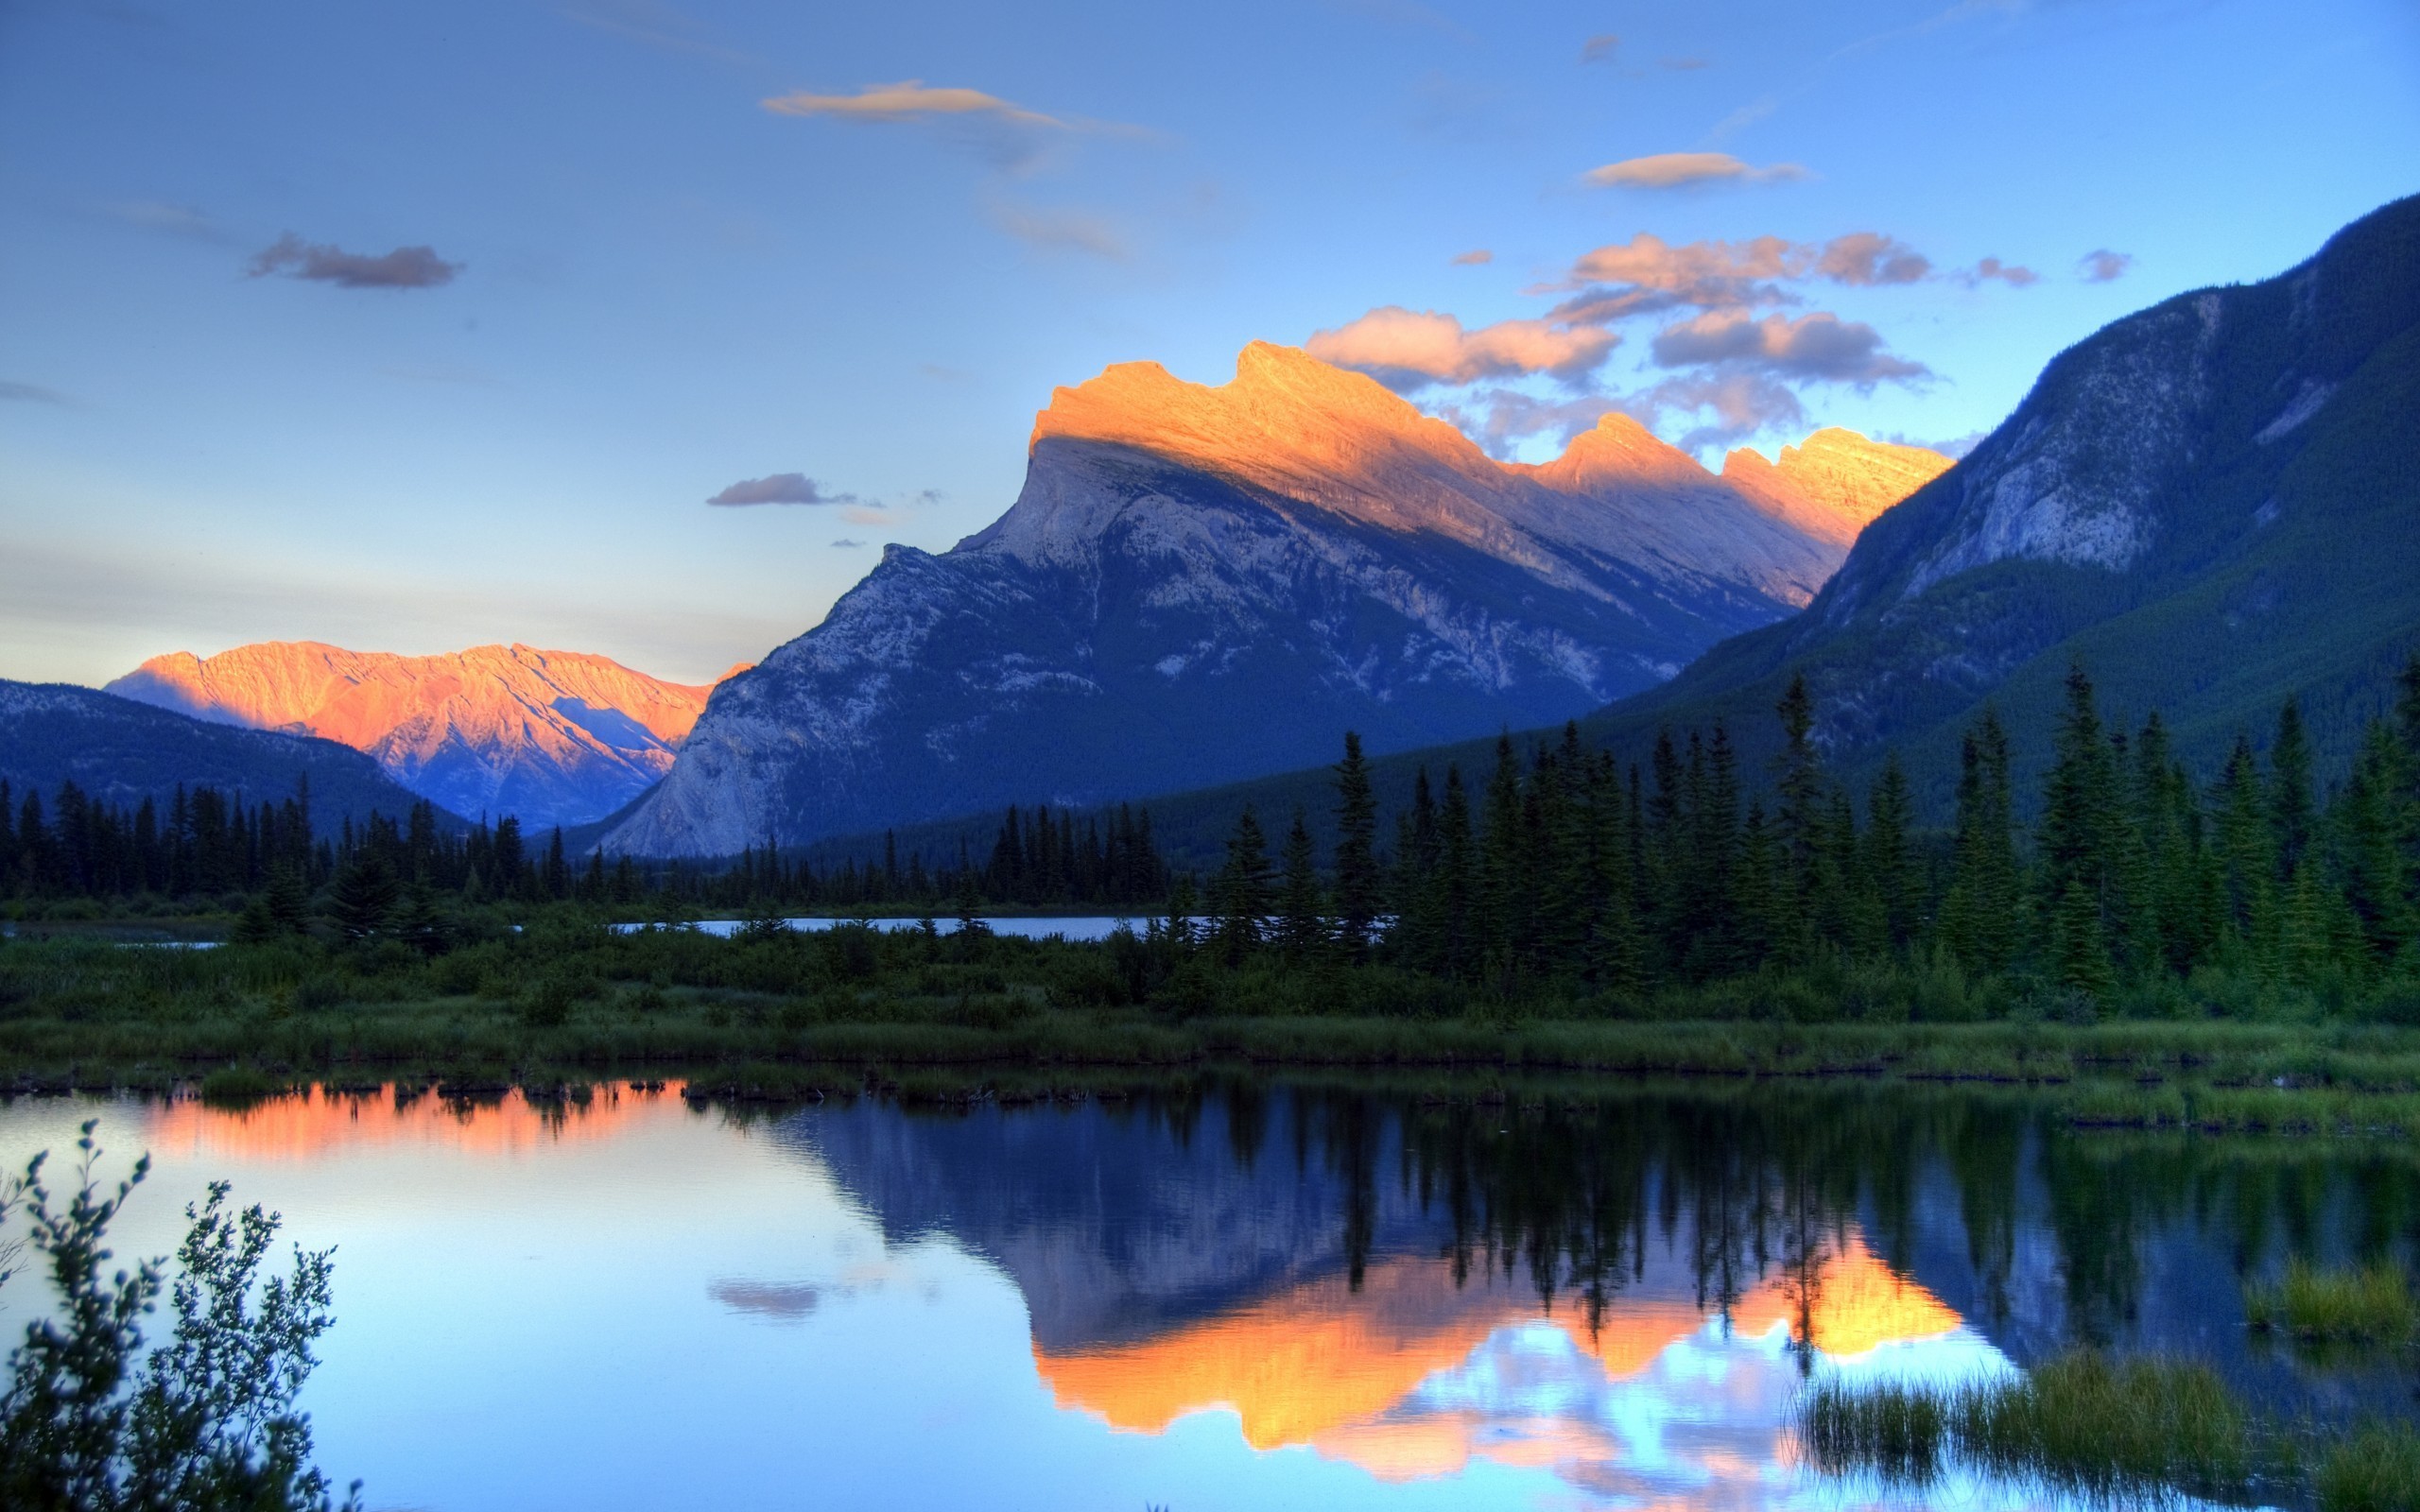 General 2560x1600 water nature landscape mountains sky clouds reflection